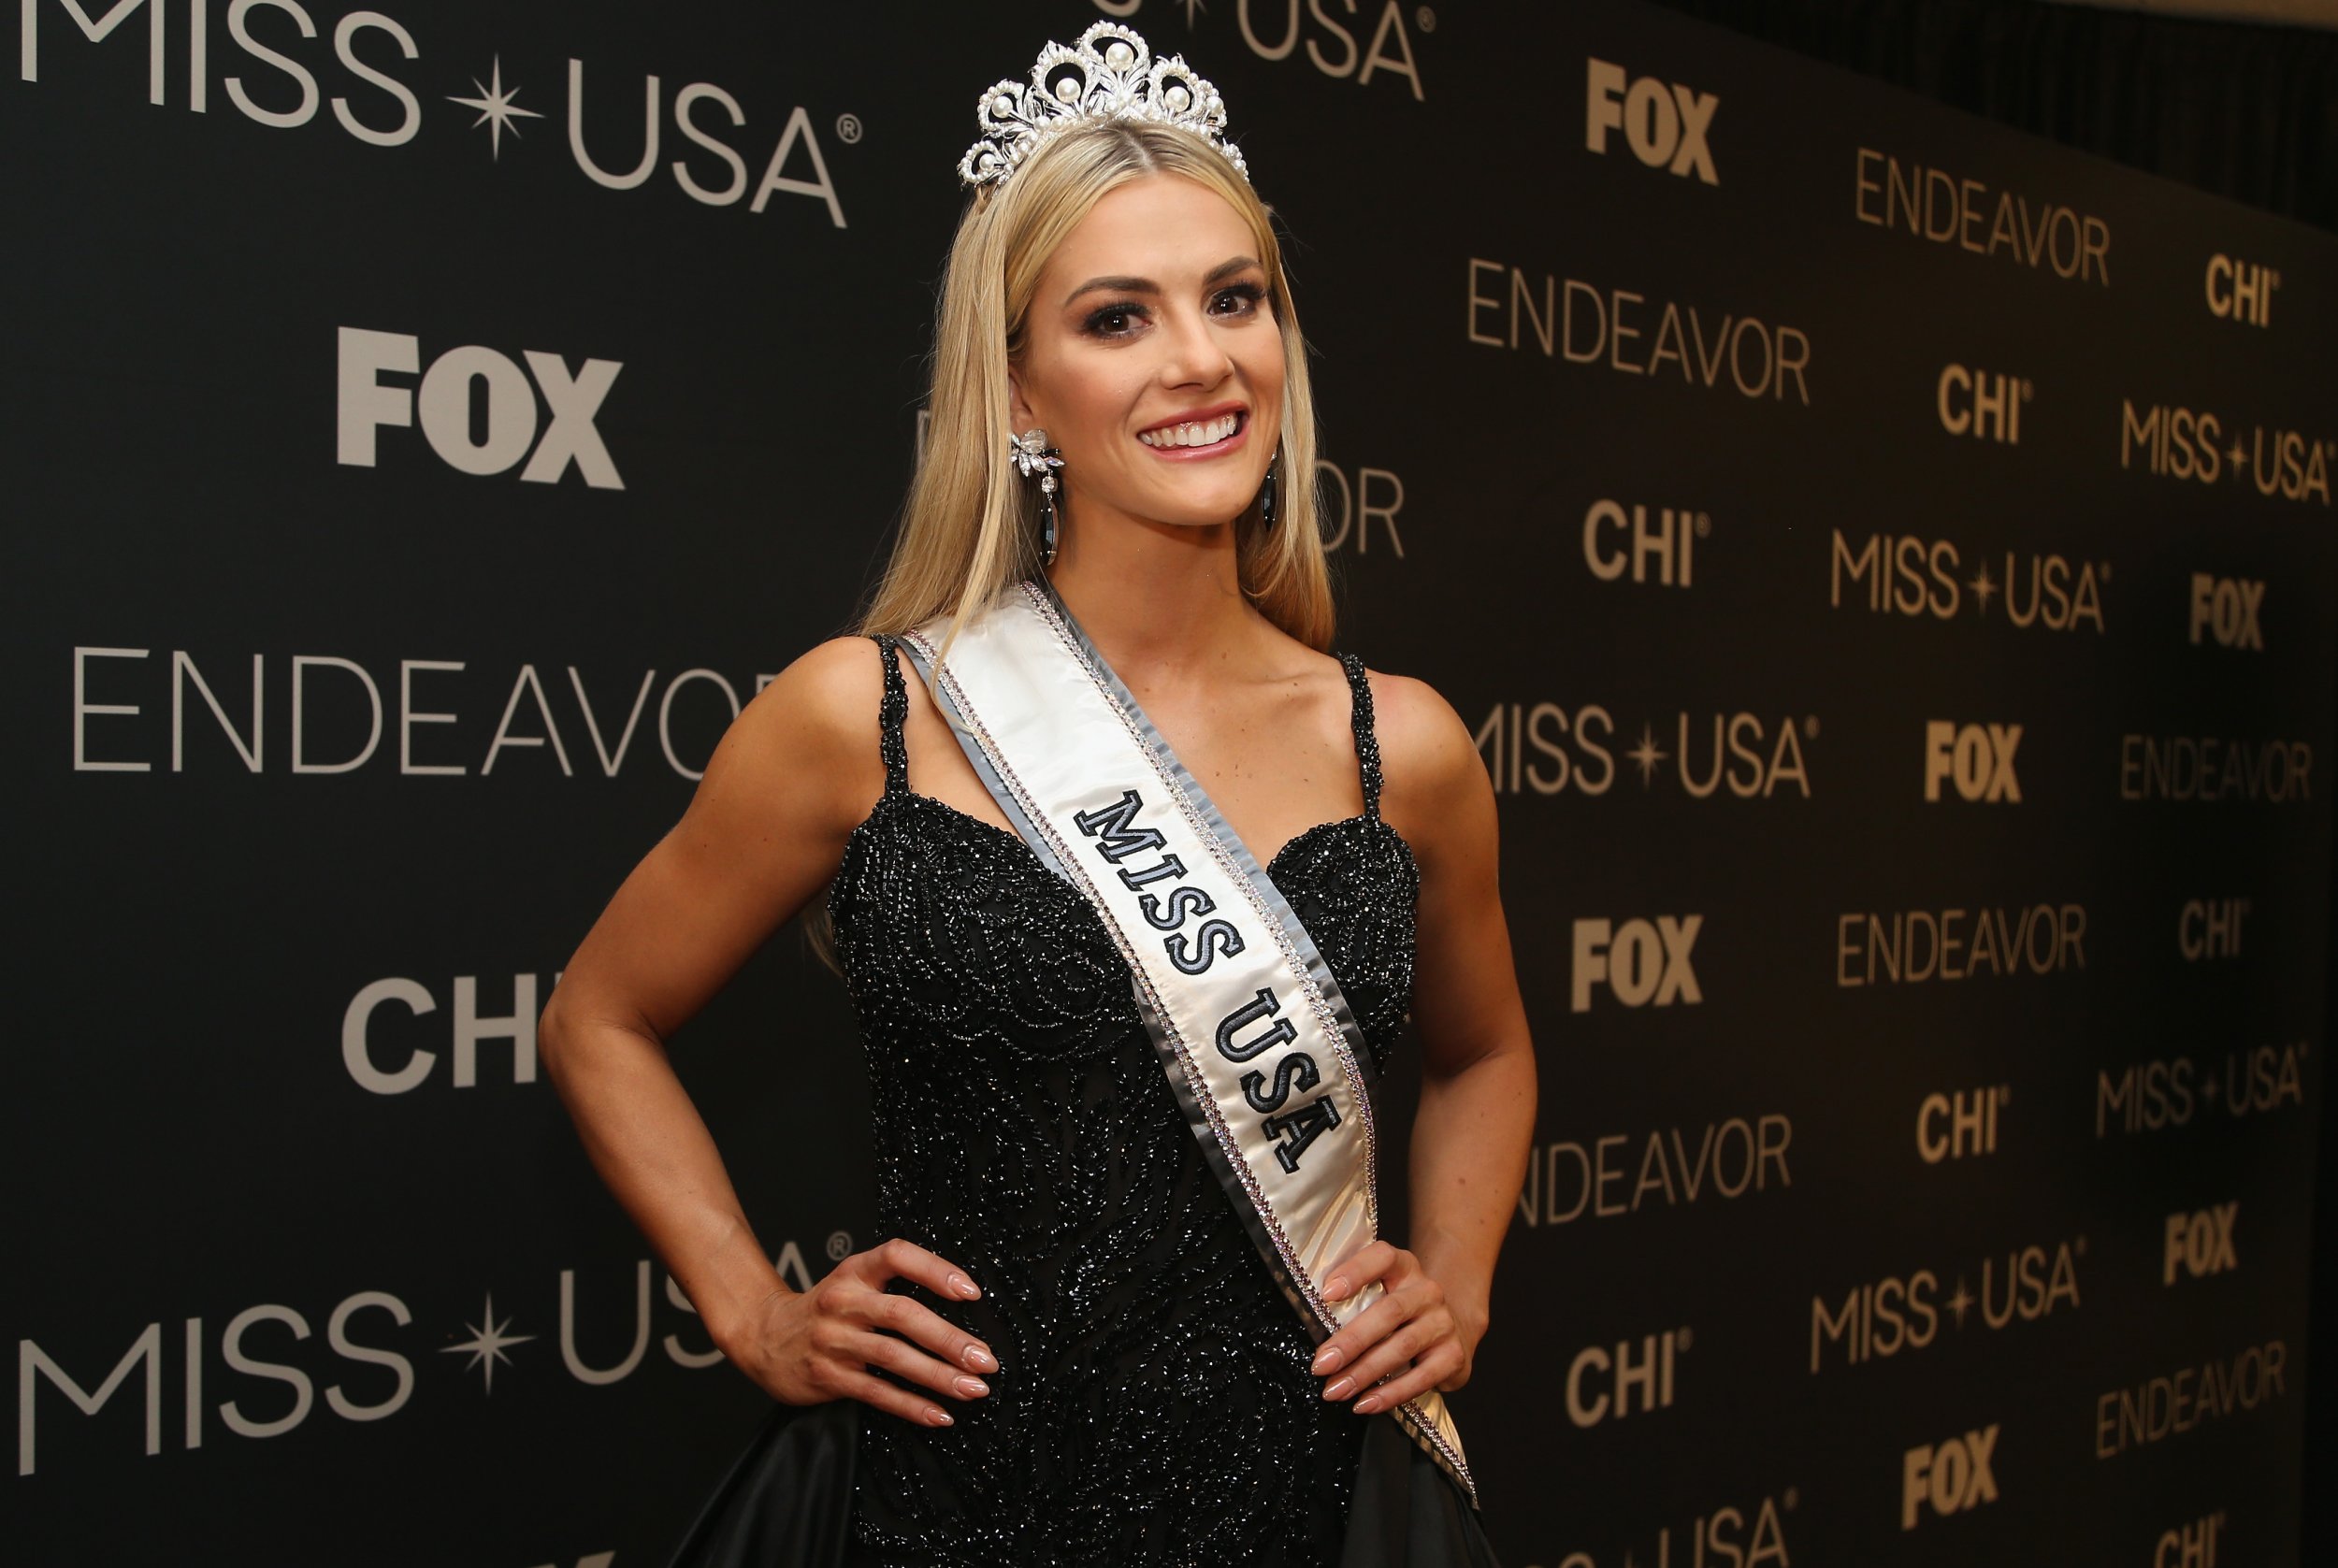 miss usa miss america pageant differences 